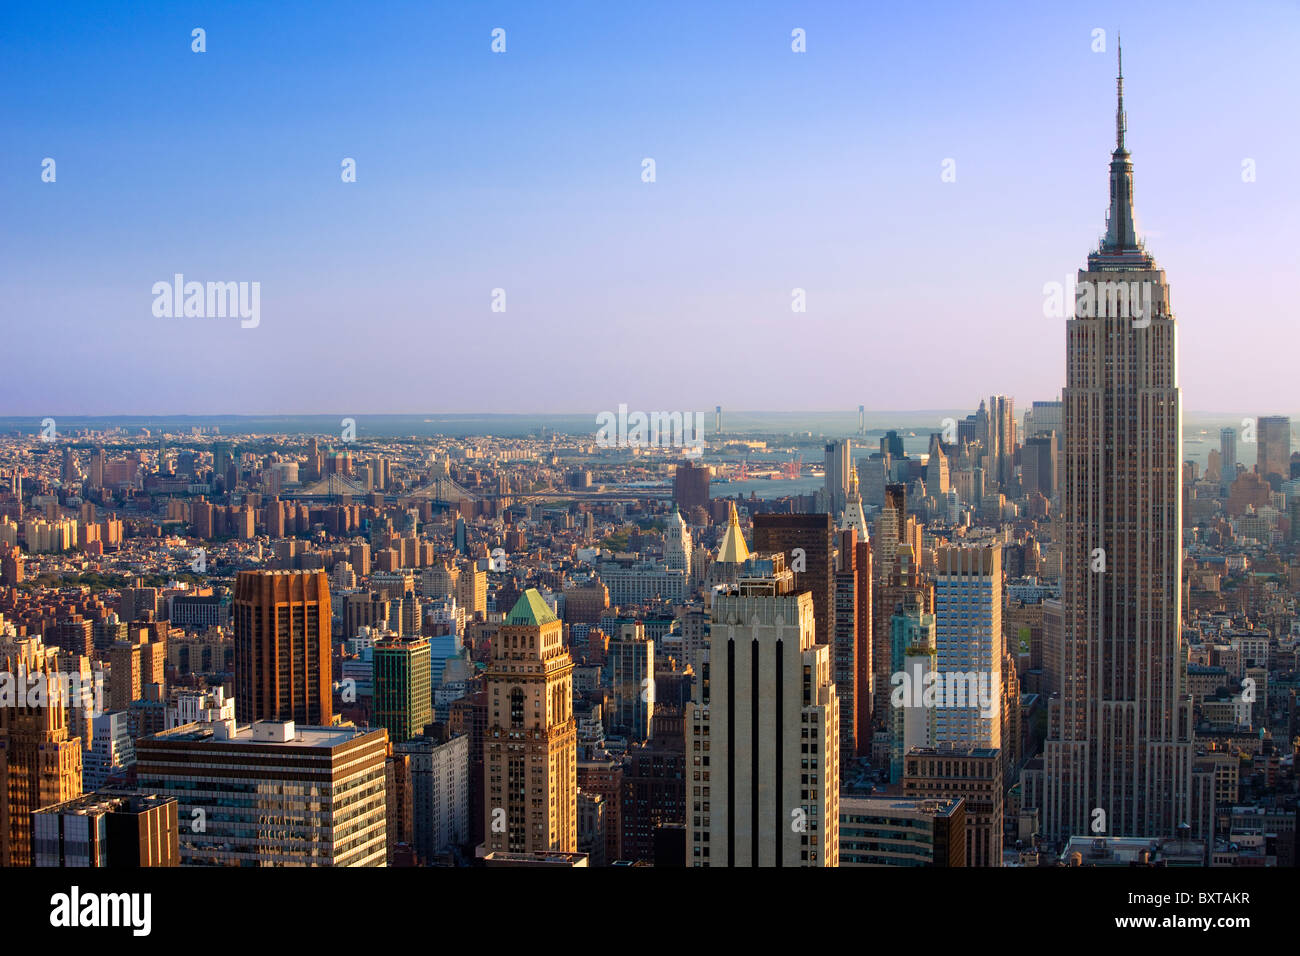 Late afternoon view of the Empire State building and the skyline of Manhattan, New York City, USA Stock Photo